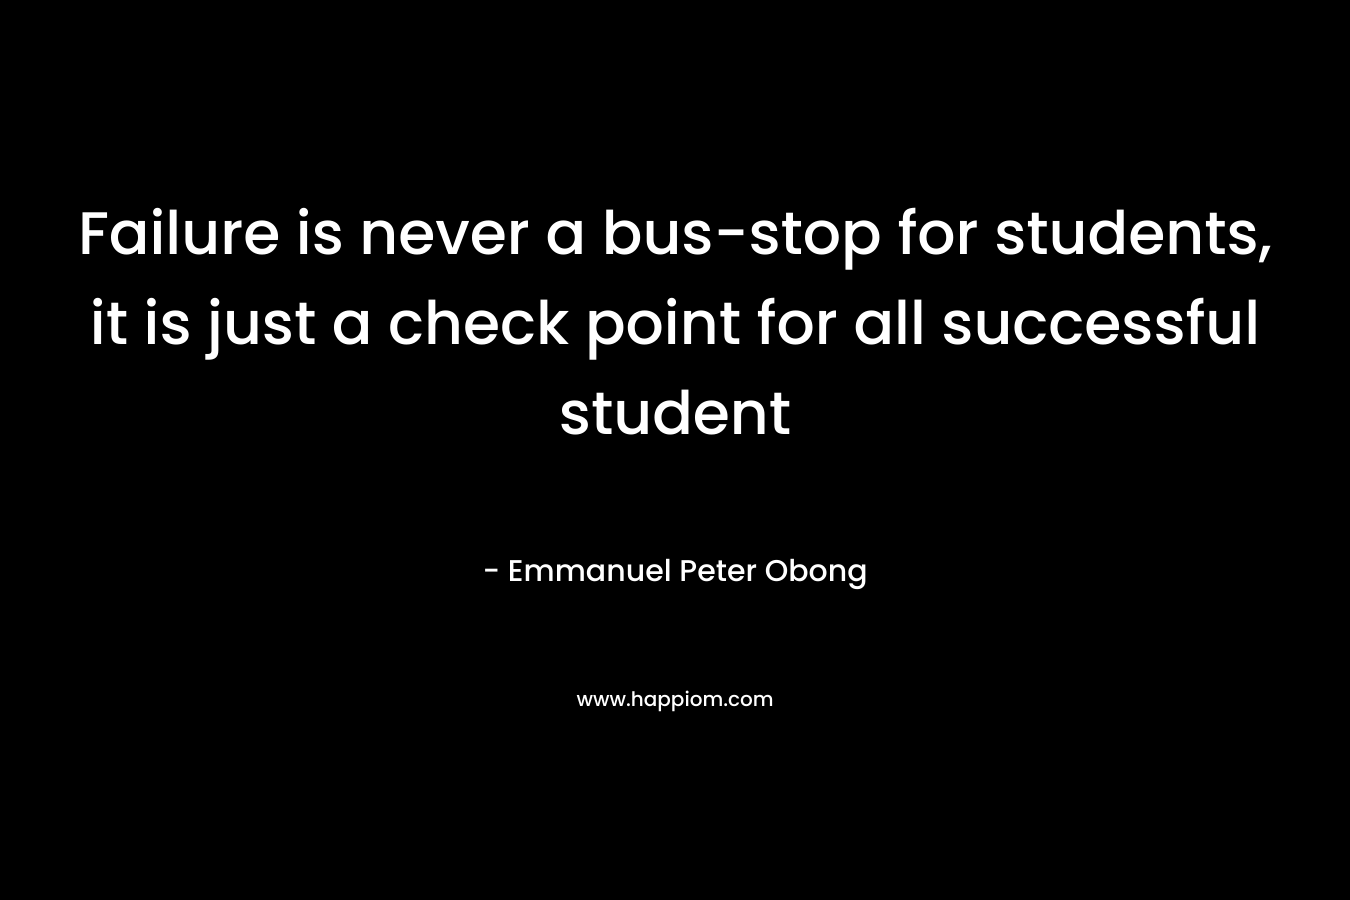 Failure is never a bus-stop for students, it is just a check point for all successful student – Emmanuel Peter Obong